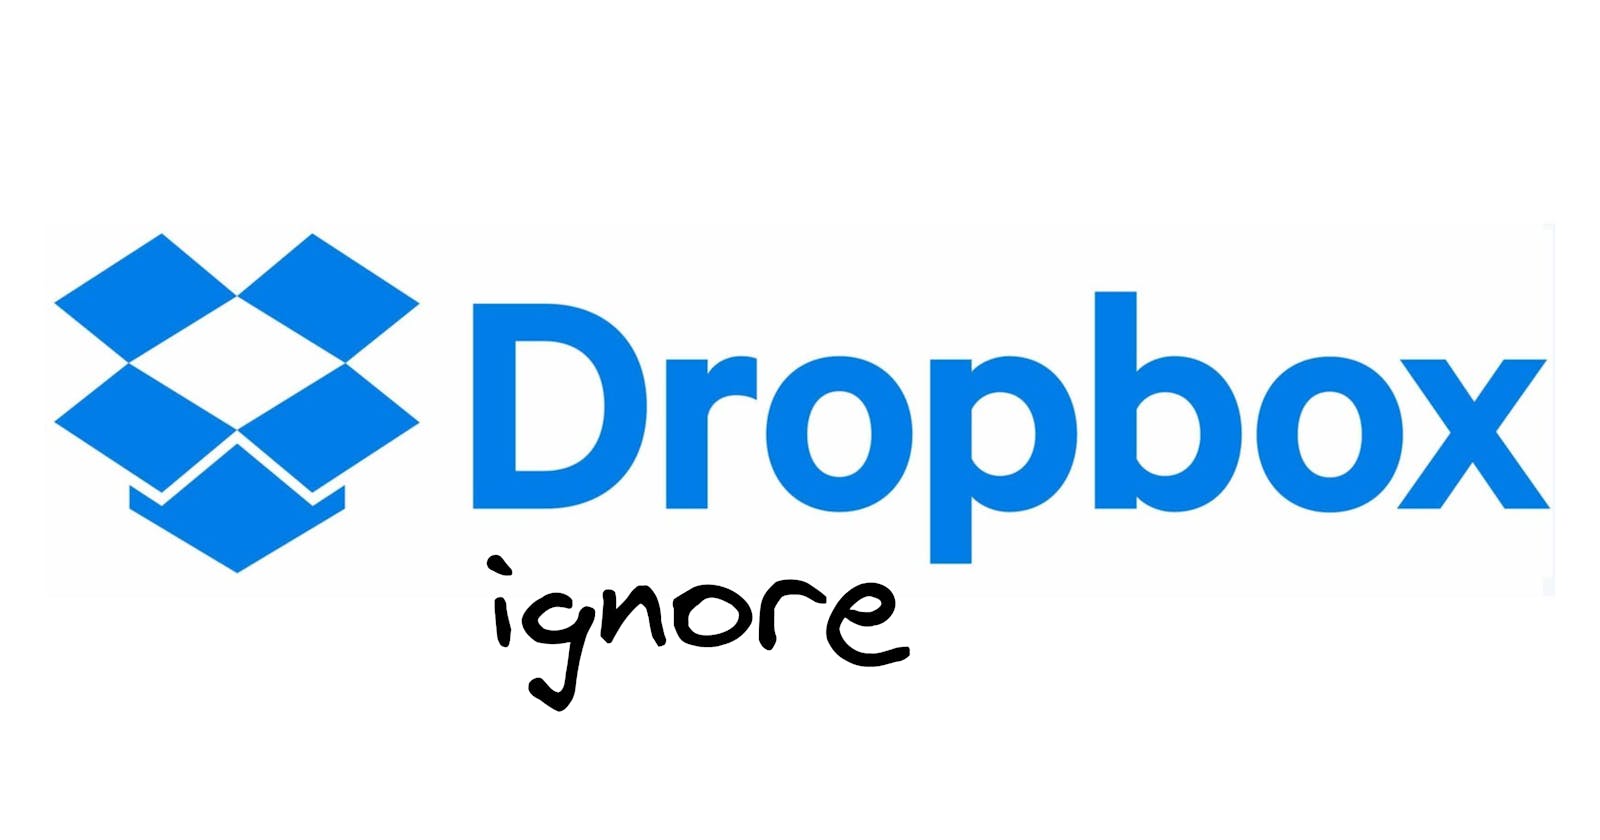 .dropboxignore, the .gitignore analogue that Dropbox should introduce as a feature.